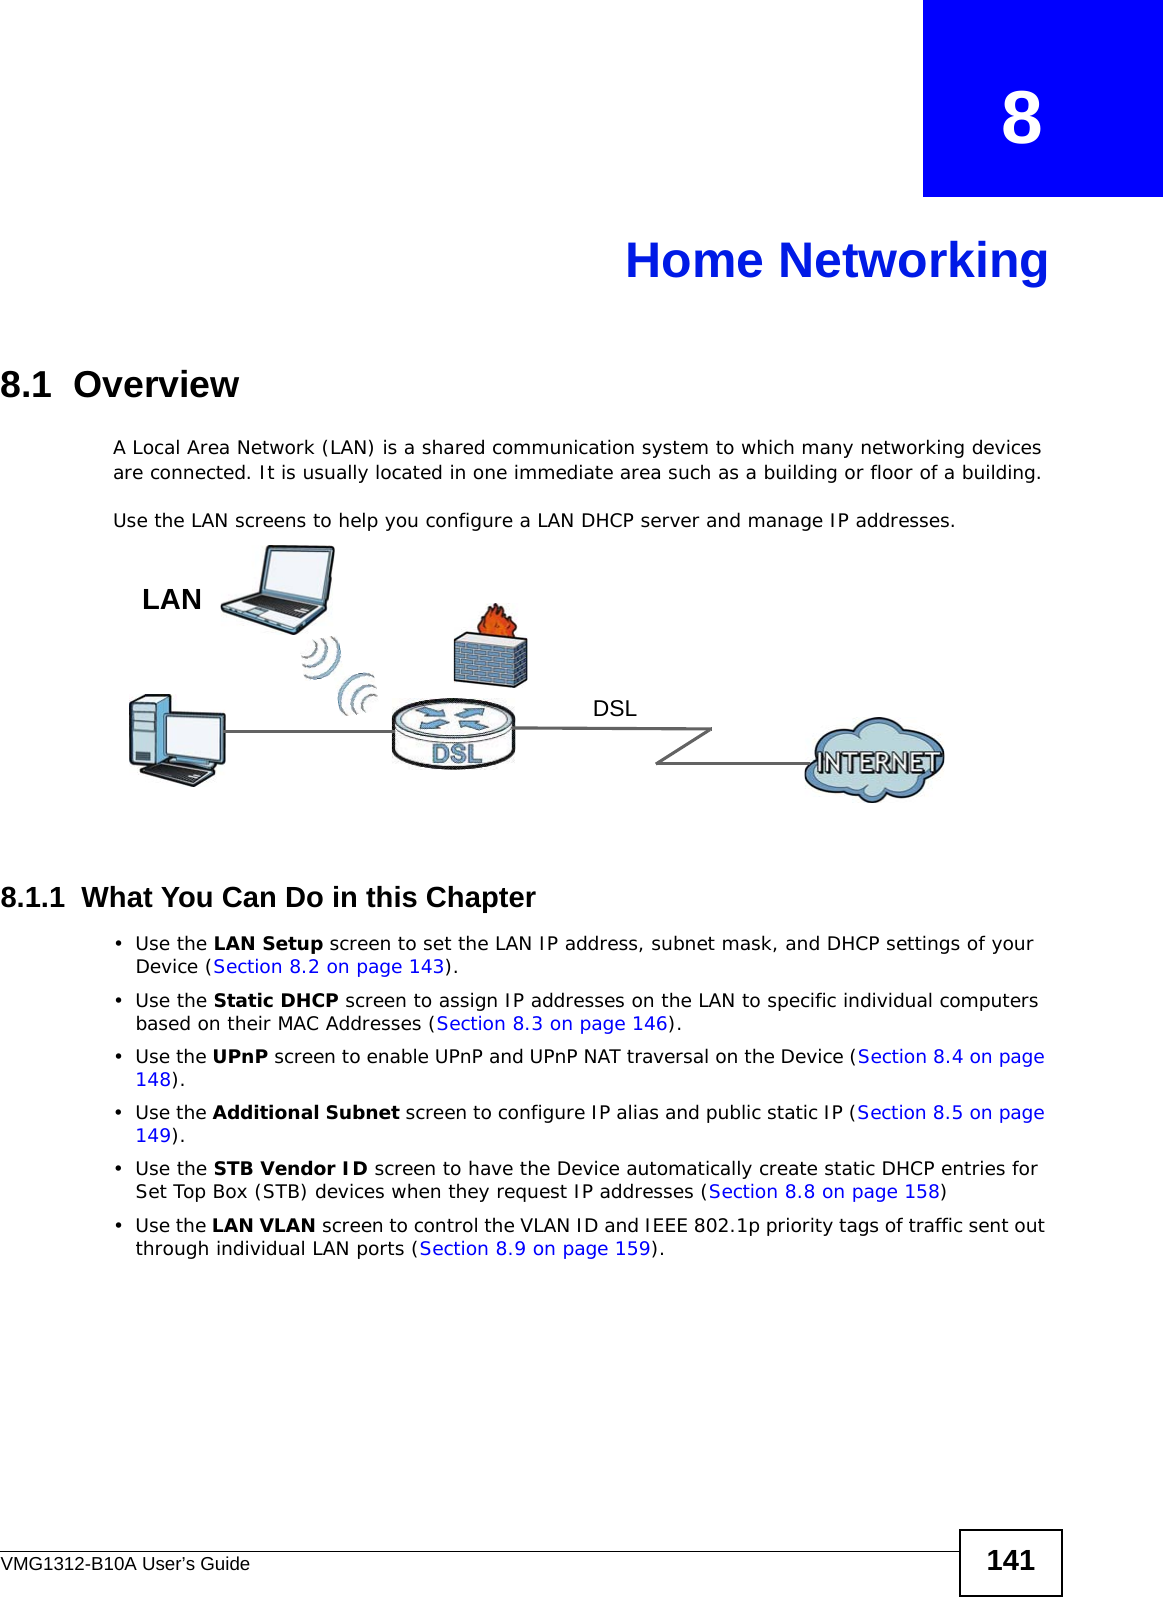 VMG1312-B10A User’s Guide 141CHAPTER   8Home Networking8.1  OverviewA Local Area Network (LAN) is a shared communication system to which many networking devices are connected. It is usually located in one immediate area such as a building or floor of a building.Use the LAN screens to help you configure a LAN DHCP server and manage IP addresses.8.1.1  What You Can Do in this Chapter•Use the LAN Setup screen to set the LAN IP address, subnet mask, and DHCP settings of your Device (Section 8.2 on page 143).•Use the Static DHCP screen to assign IP addresses on the LAN to specific individual computers based on their MAC Addresses (Section 8.3 on page 146). •Use the UPnP screen to enable UPnP and UPnP NAT traversal on the Device (Section 8.4 on page 148).•Use the Additional Subnet screen to configure IP alias and public static IP (Section 8.5 on page 149).•Use the STB Vendor ID screen to have the Device automatically create static DHCP entries for Set Top Box (STB) devices when they request IP addresses (Section 8.8 on page 158)•Use the LAN VLAN screen to control the VLAN ID and IEEE 802.1p priority tags of traffic sent out through individual LAN ports (Section 8.9 on page 159).DSLLAN